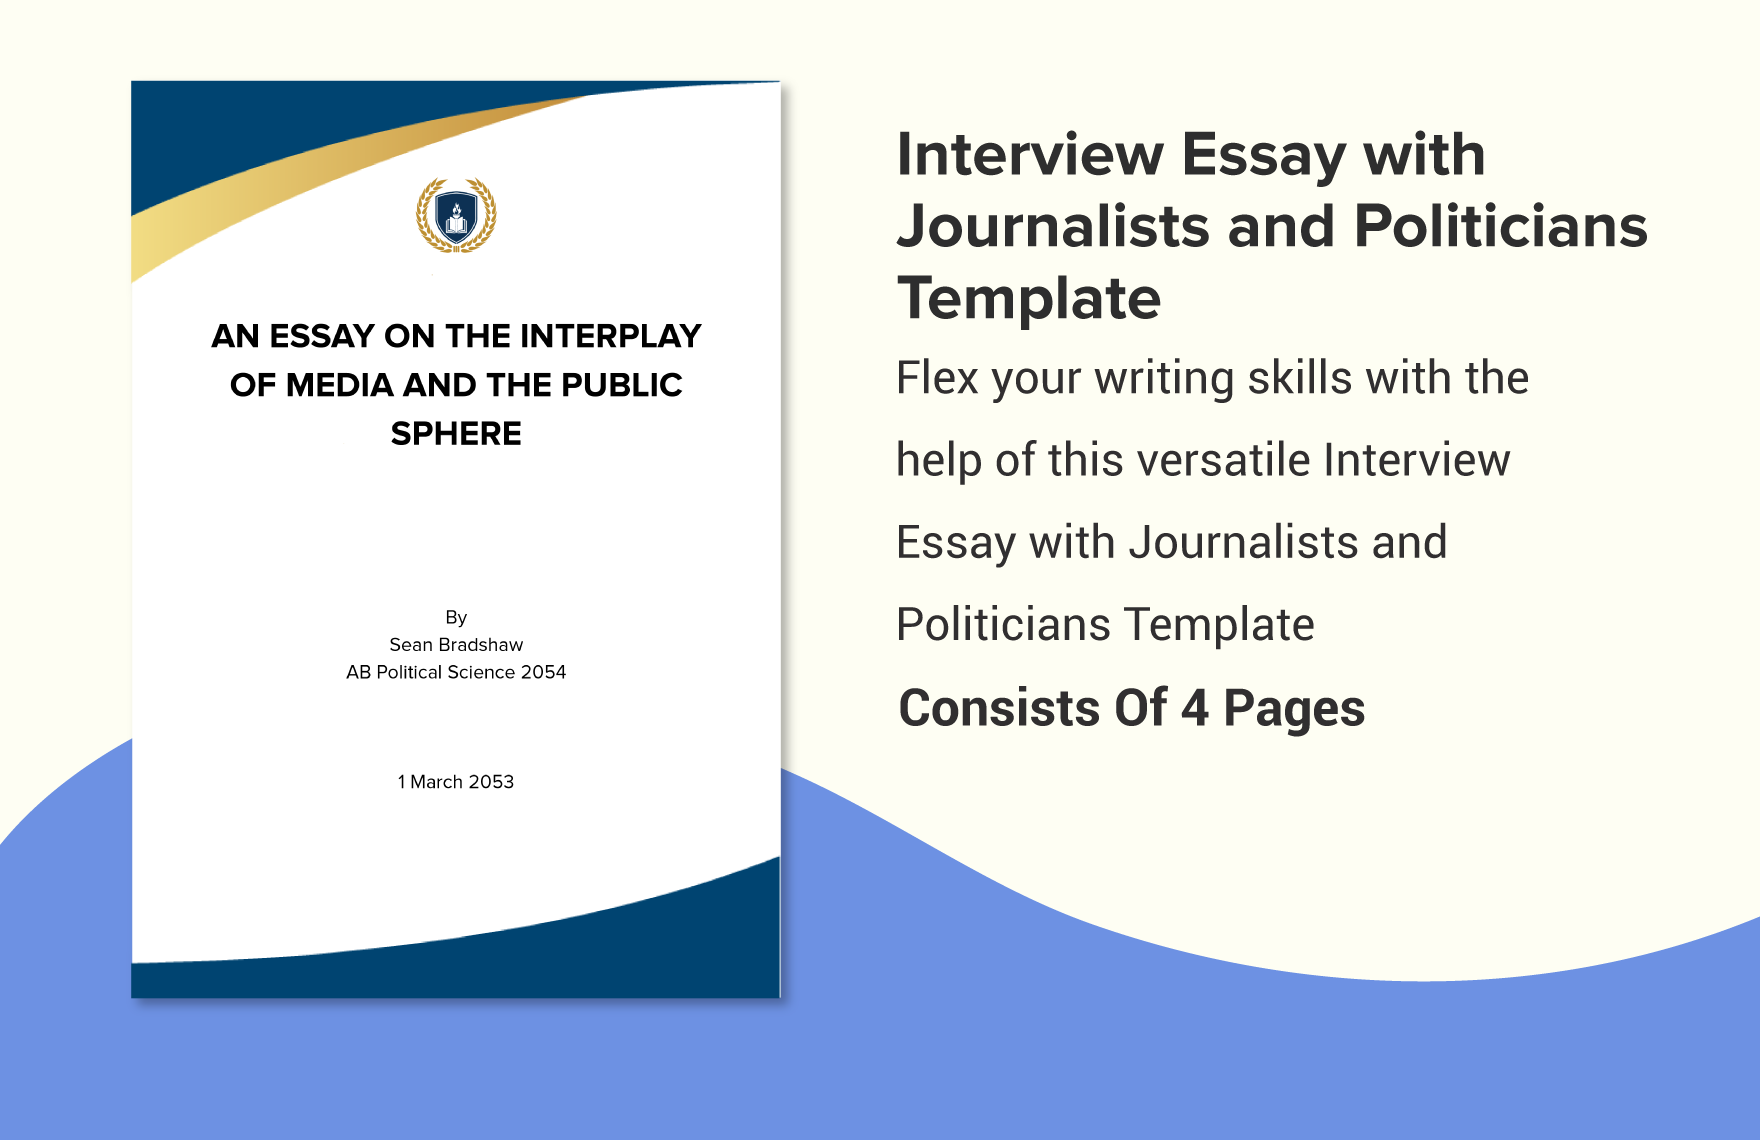 Interview Essay with Journalists and Politicians Template